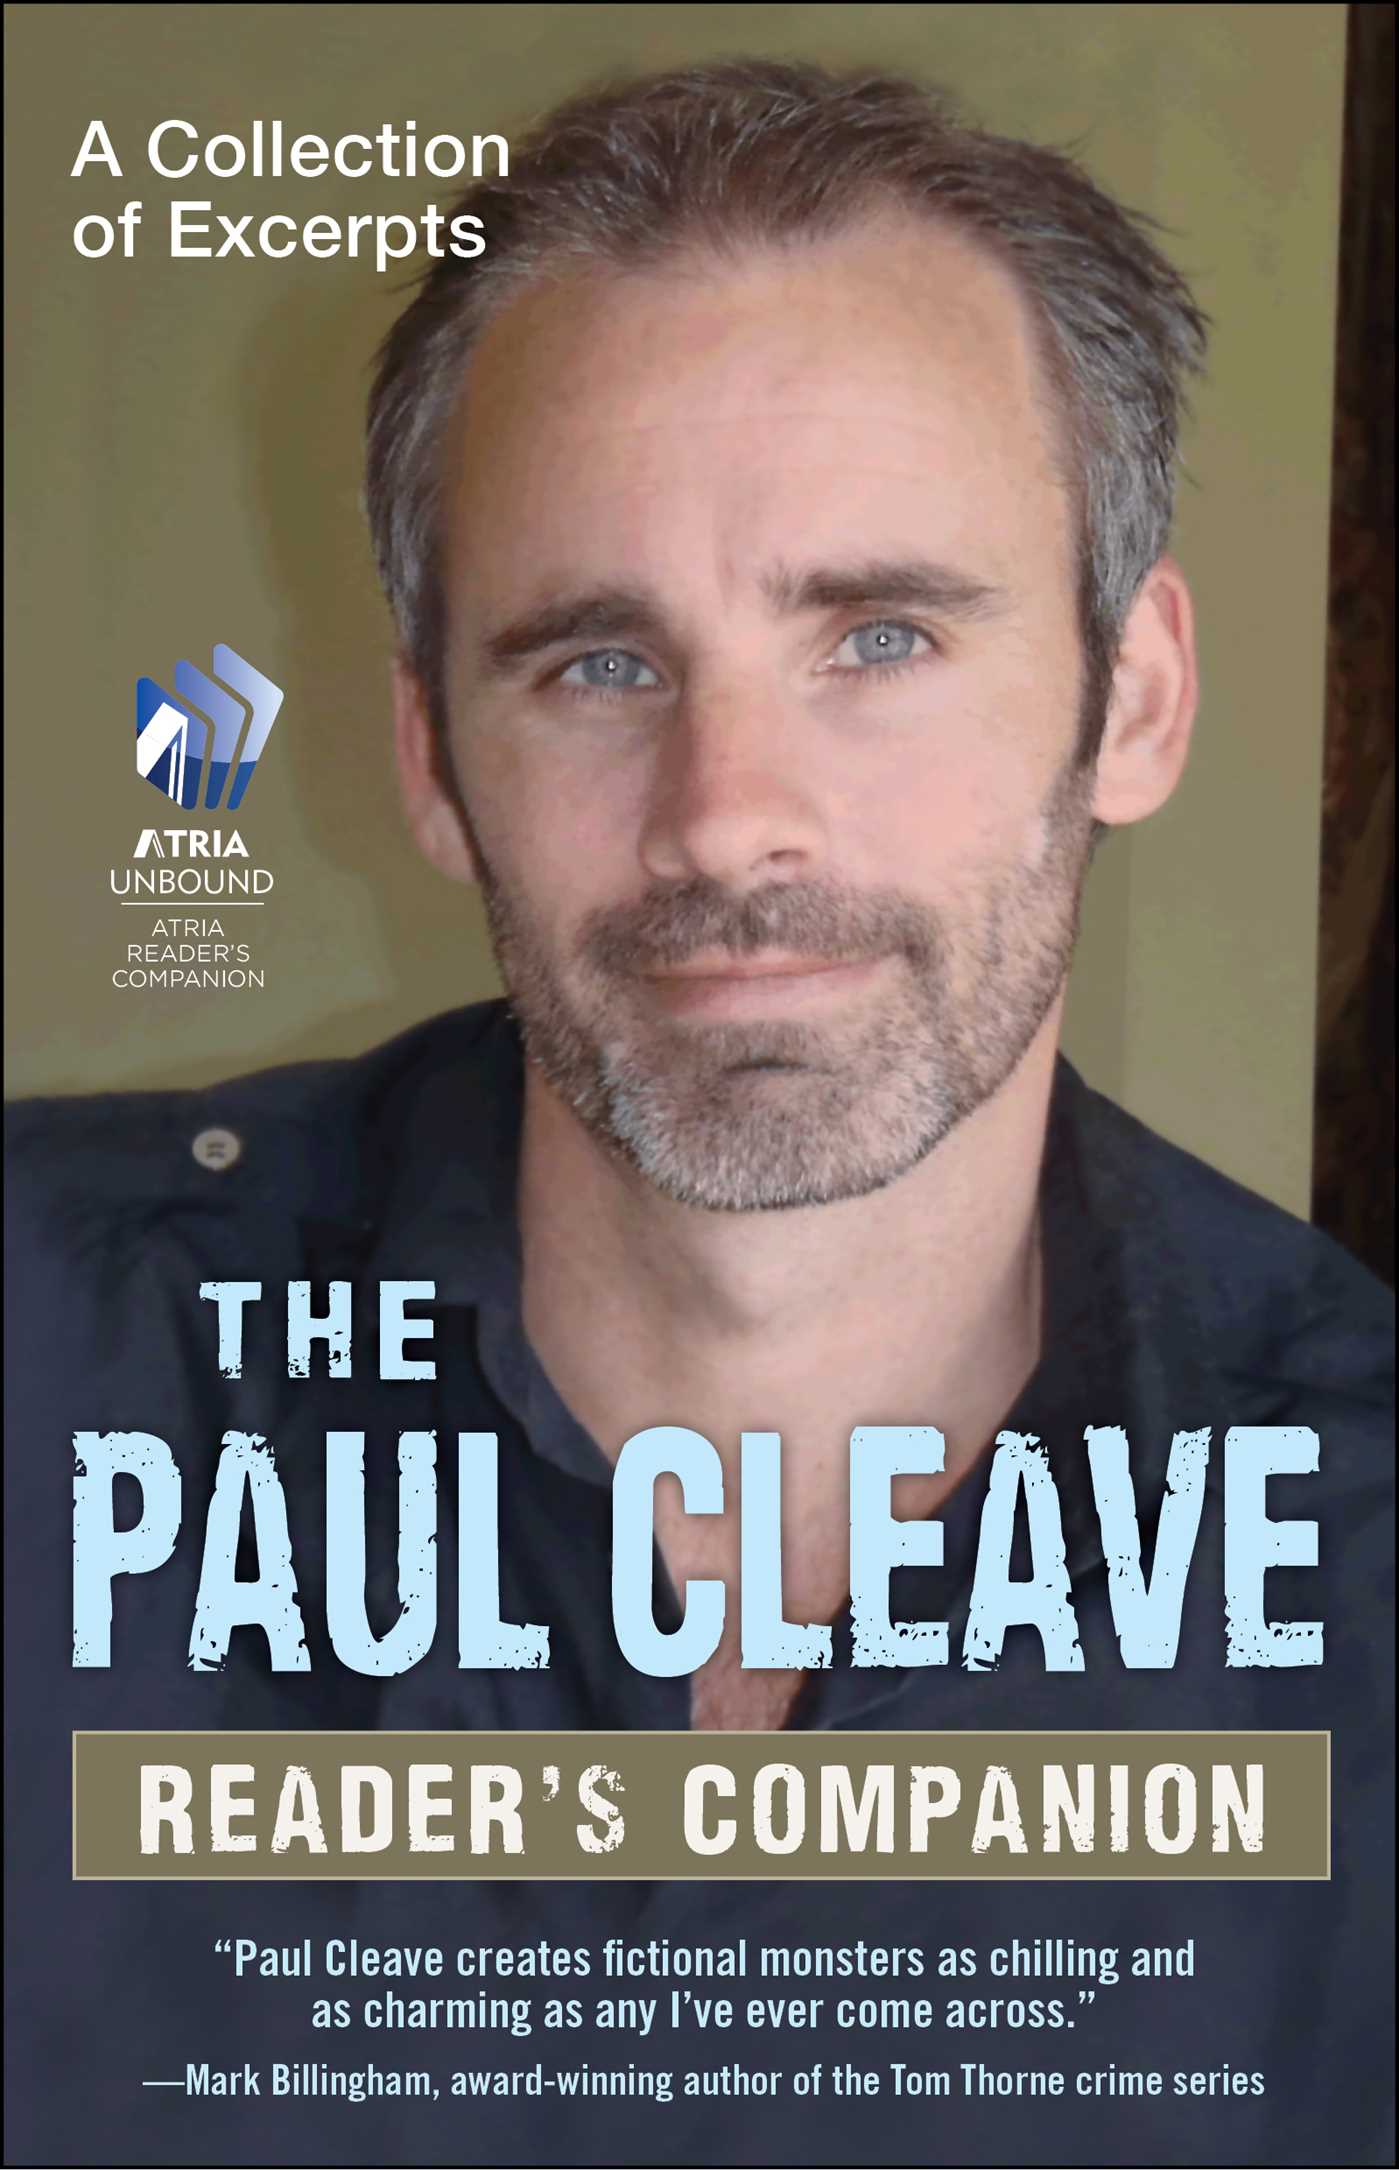 Paul Cleave Reader's Companion